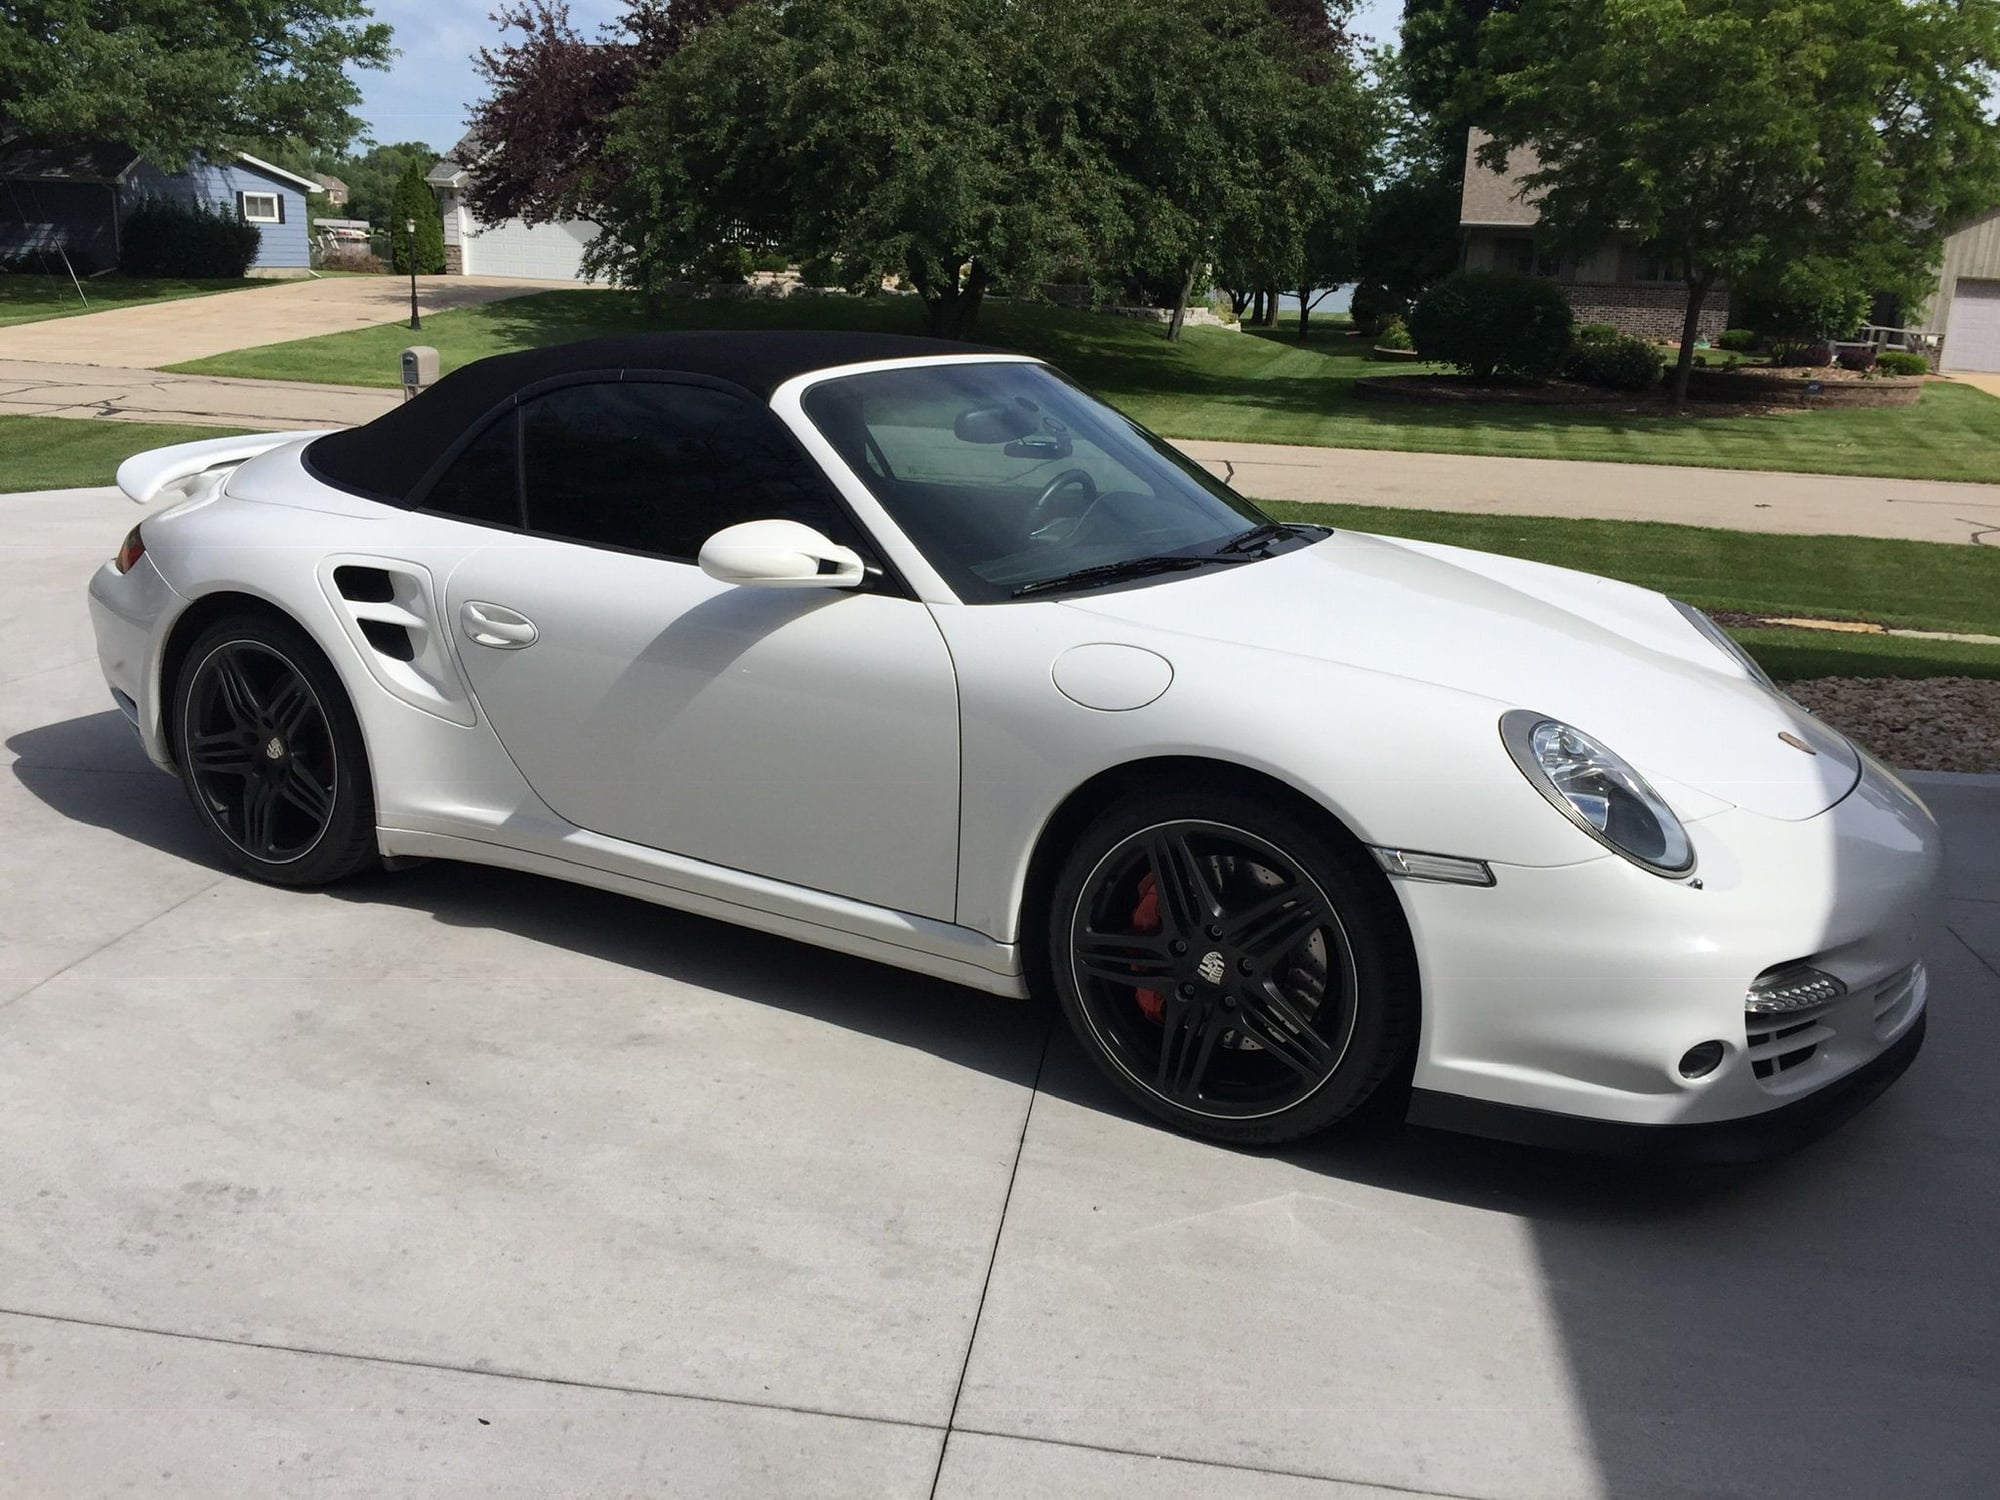 2009 Porsche 911 - 2009 911 Turbo Cab, manual, very high spec, last of the Metzger - Used - VIN WP0CD29949S773151 - 24,600 Miles - 6 cyl - AWD - Manual - Convertible - White - Oshkosh, WI 54901, United States